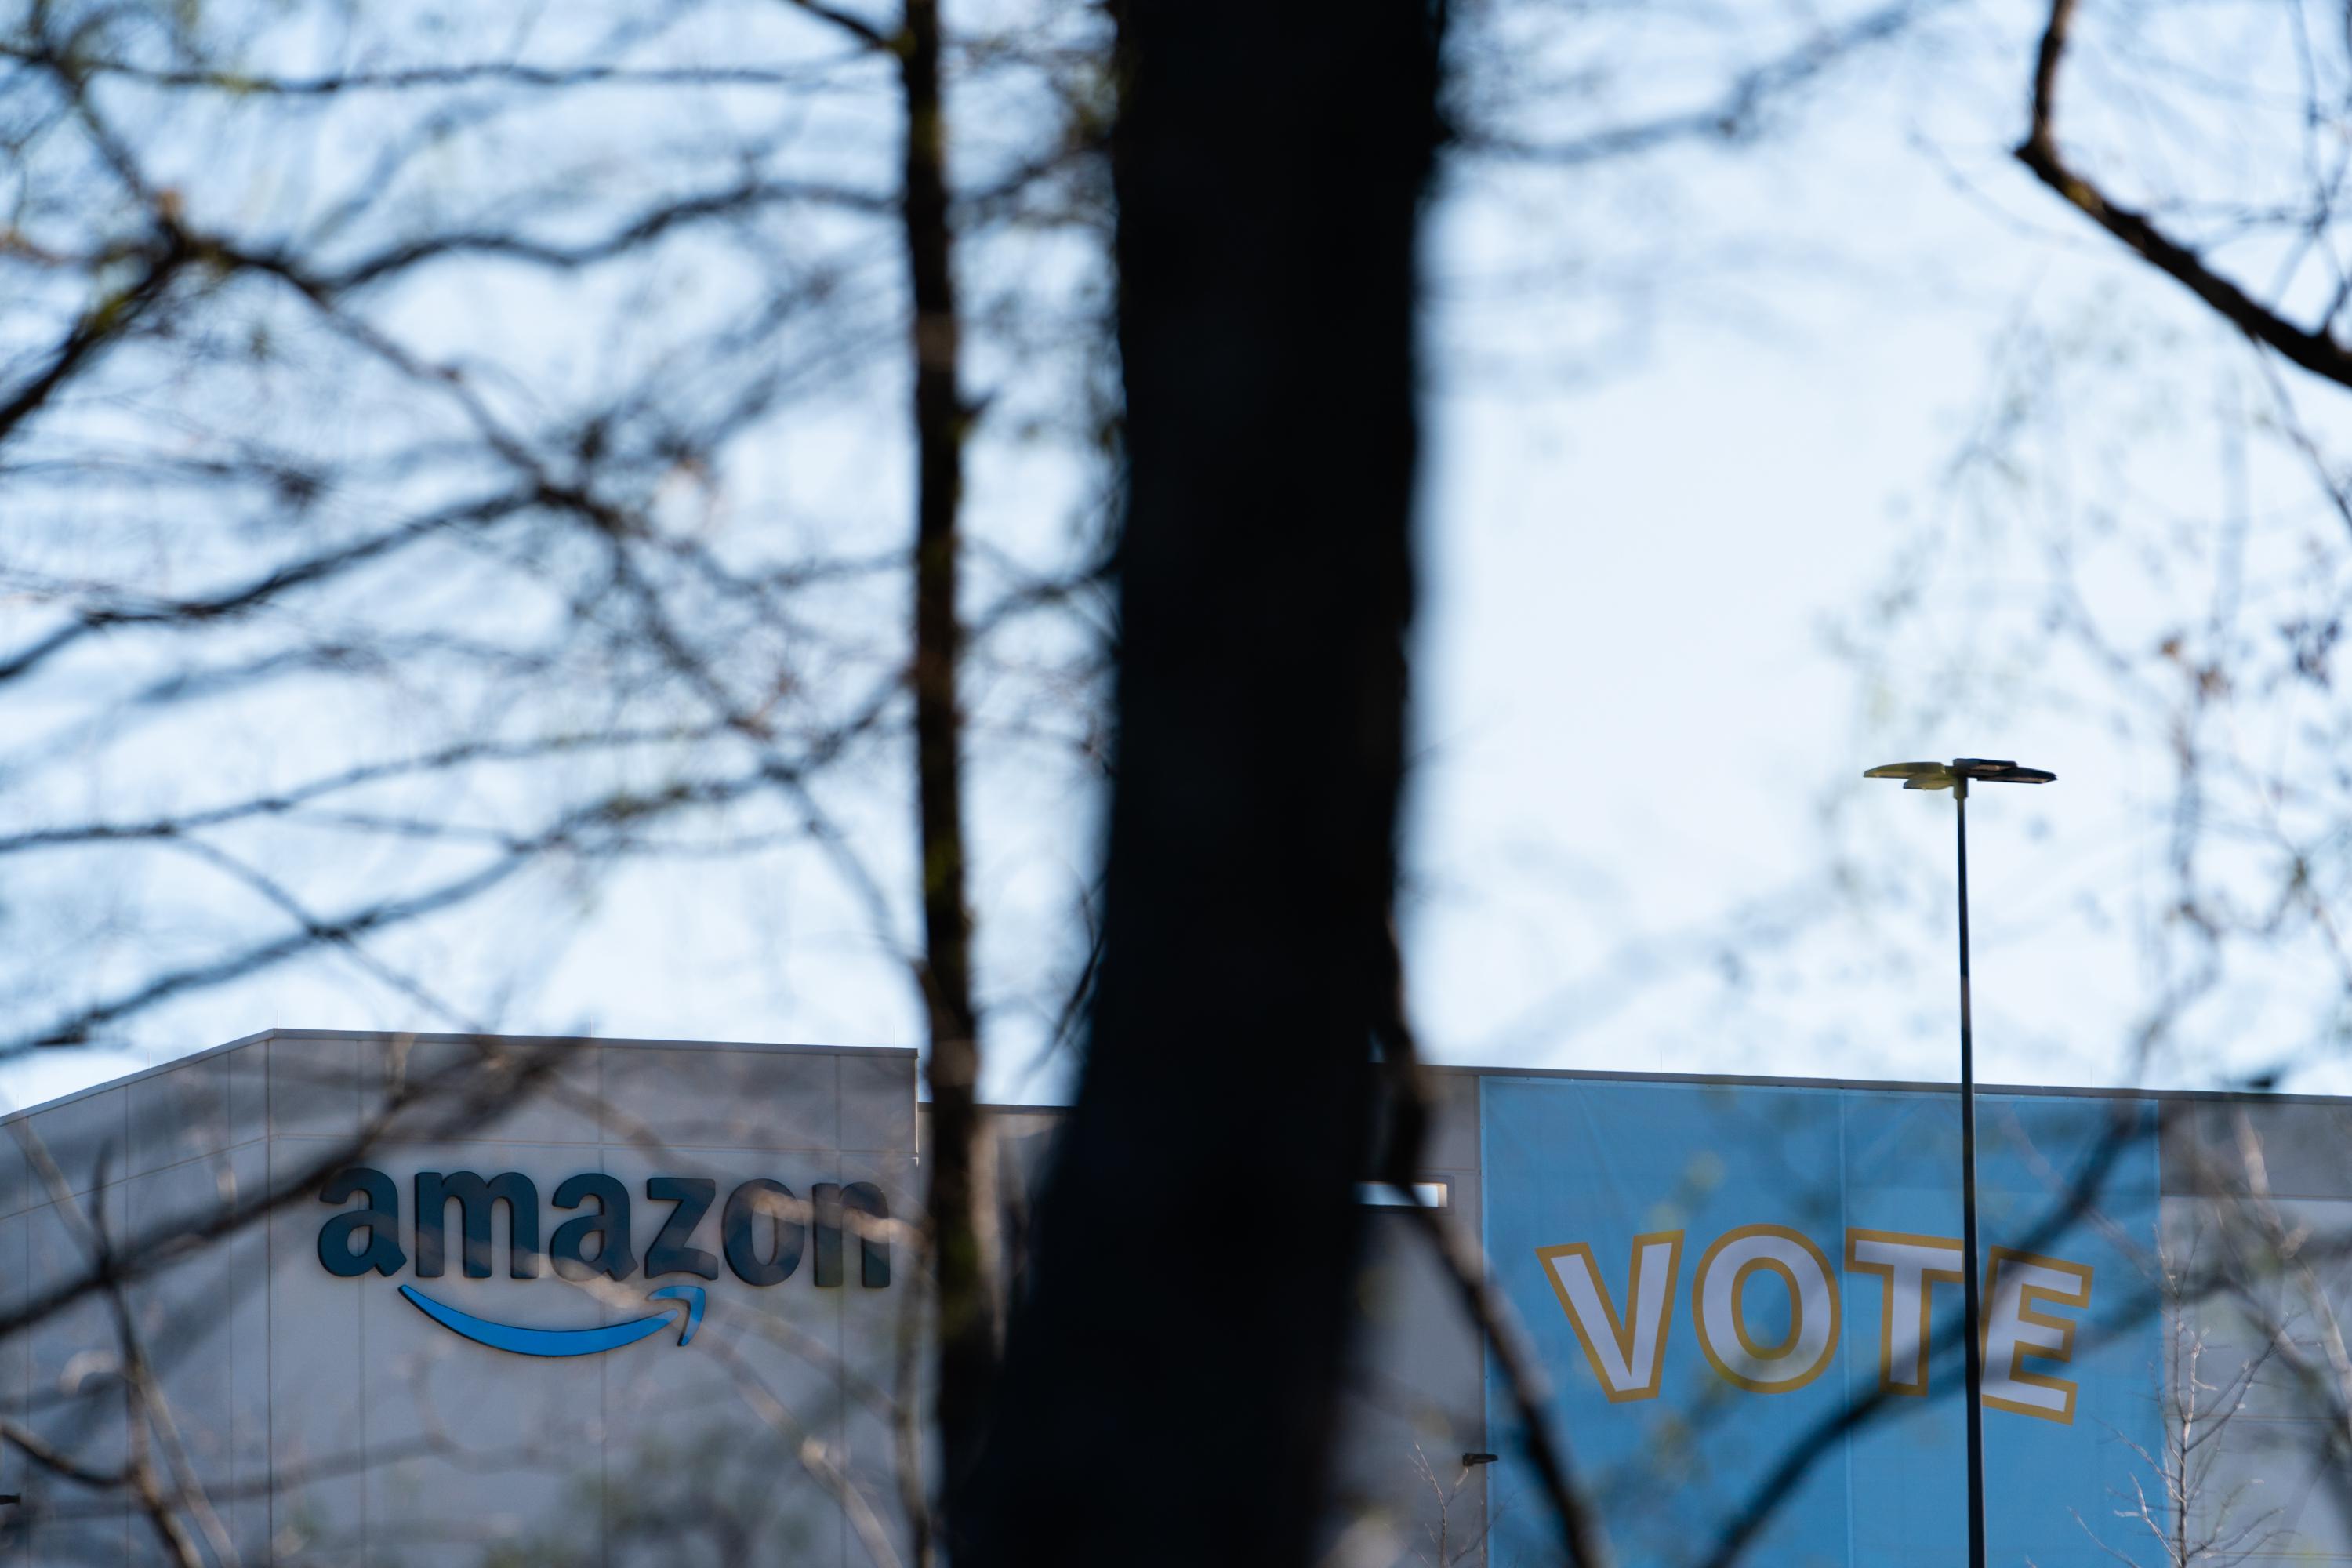 The Amazon fulfillment warehouse at the center of a unionization drive is seen on March 29, 2021 in Bessemer, Alabama. Employees at the fulfillment center are currently voting on whether to form a union, a decision that could have national repercussions. (Photo by Elijah Nouvelage/Getty Images)